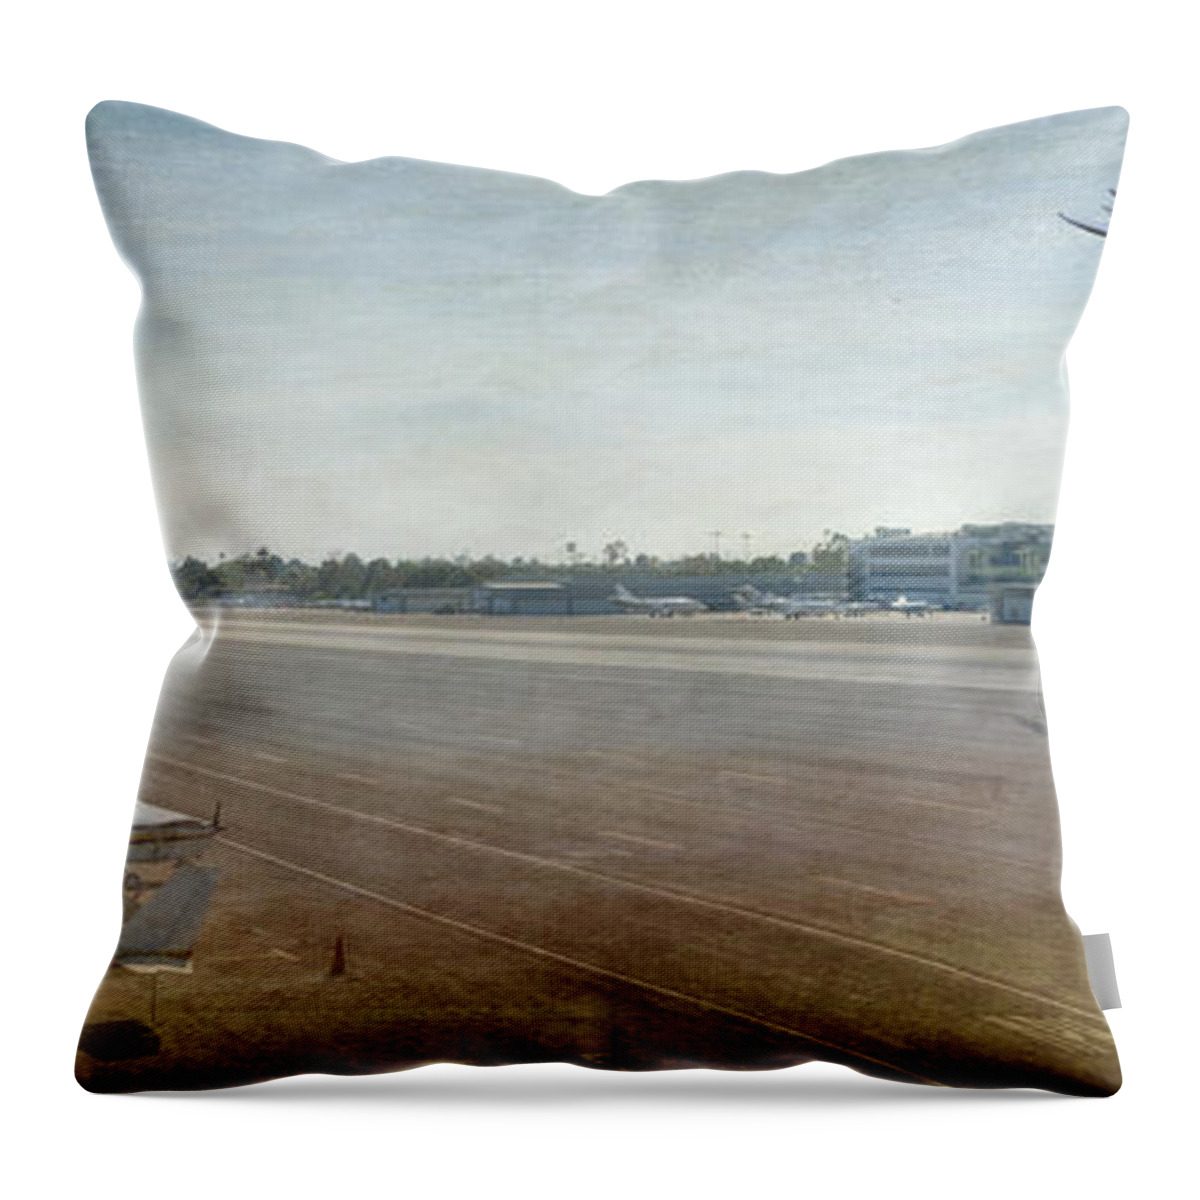 City Airport Throw Pillow featuring the photograph Small City Airport Plane taking off runway by David Zanzinger